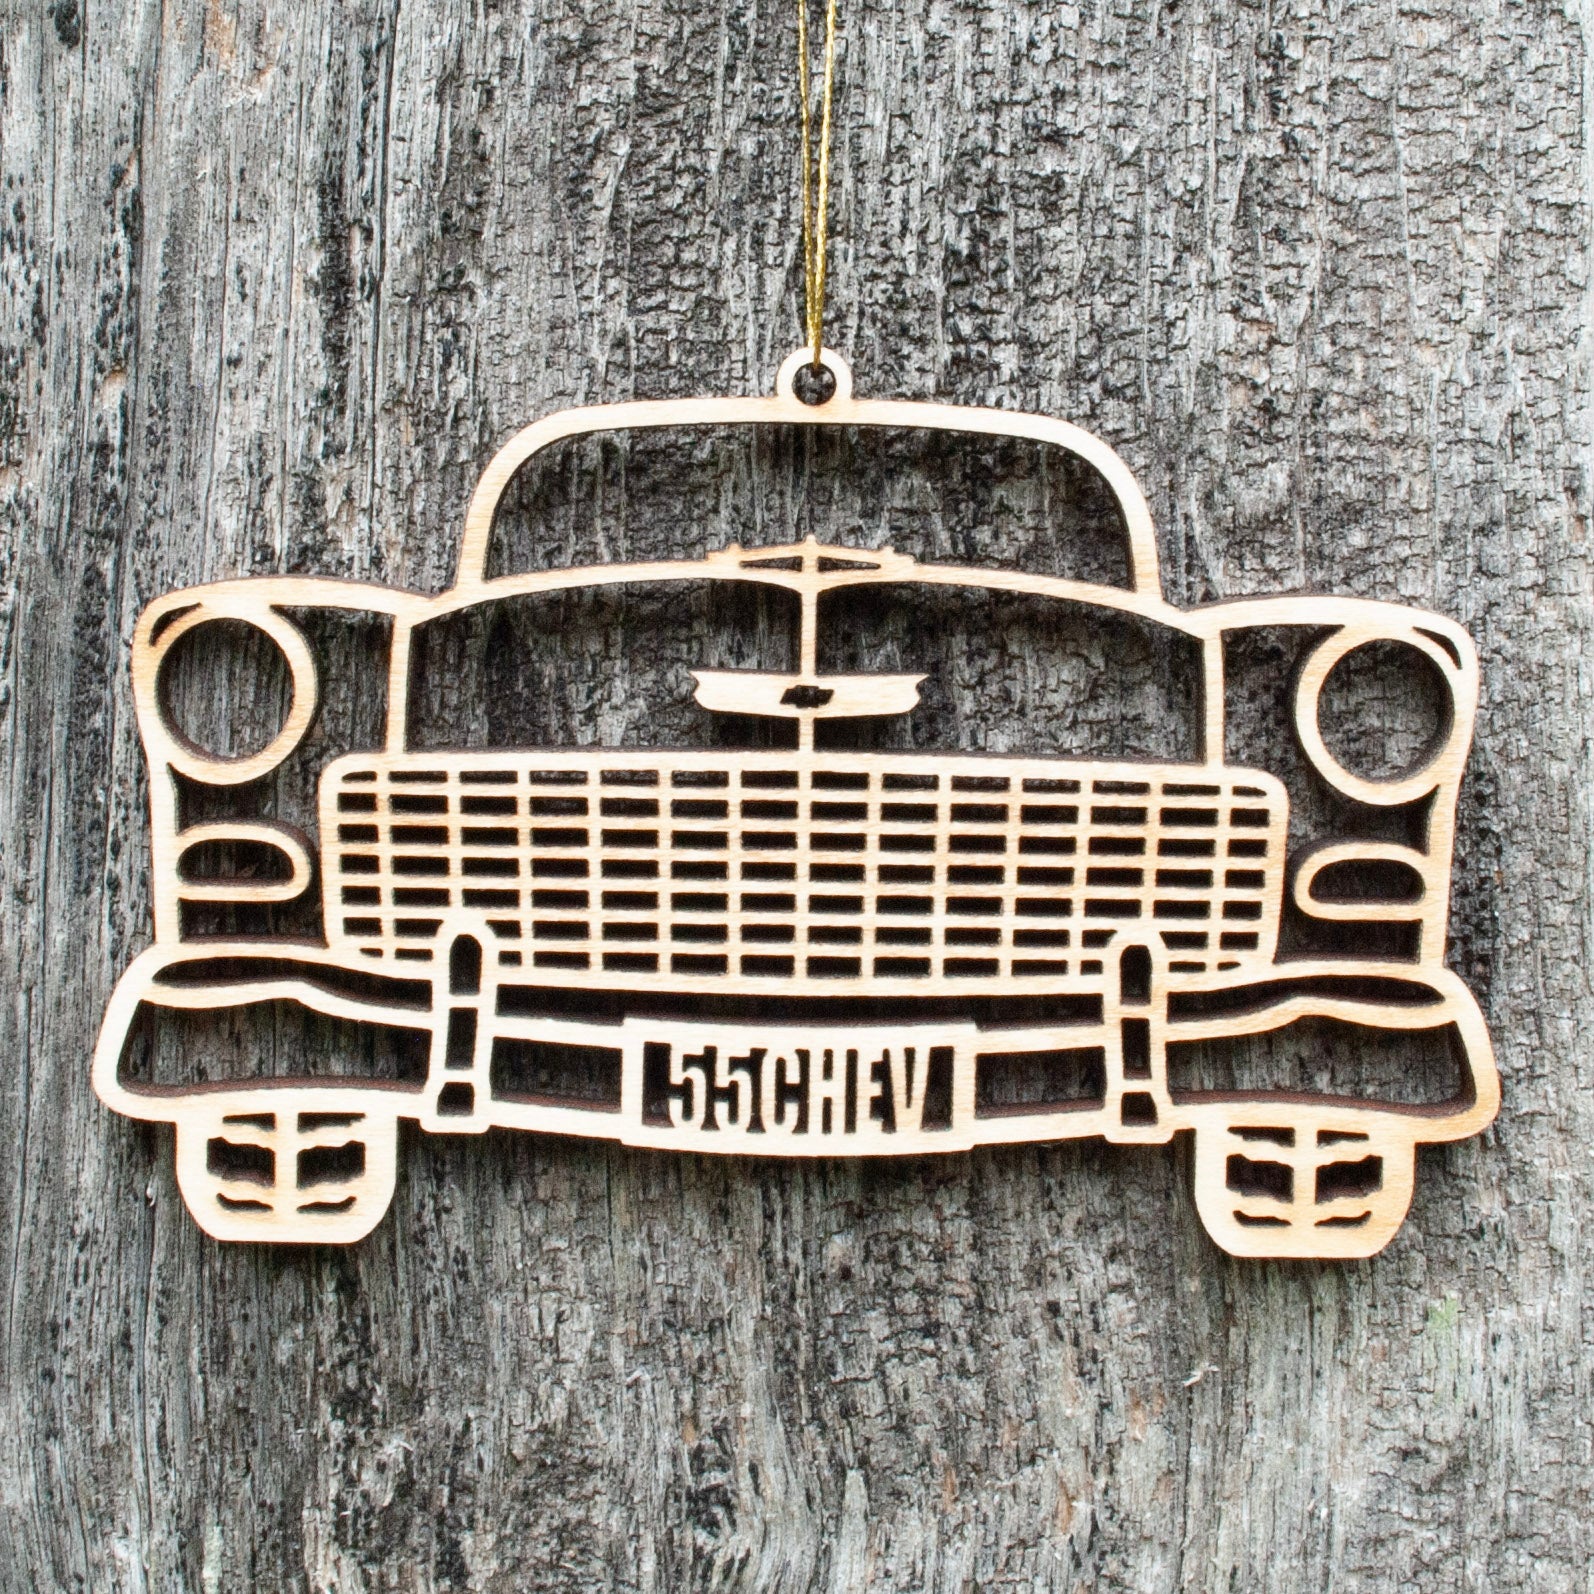 1955 Chevy Ornament